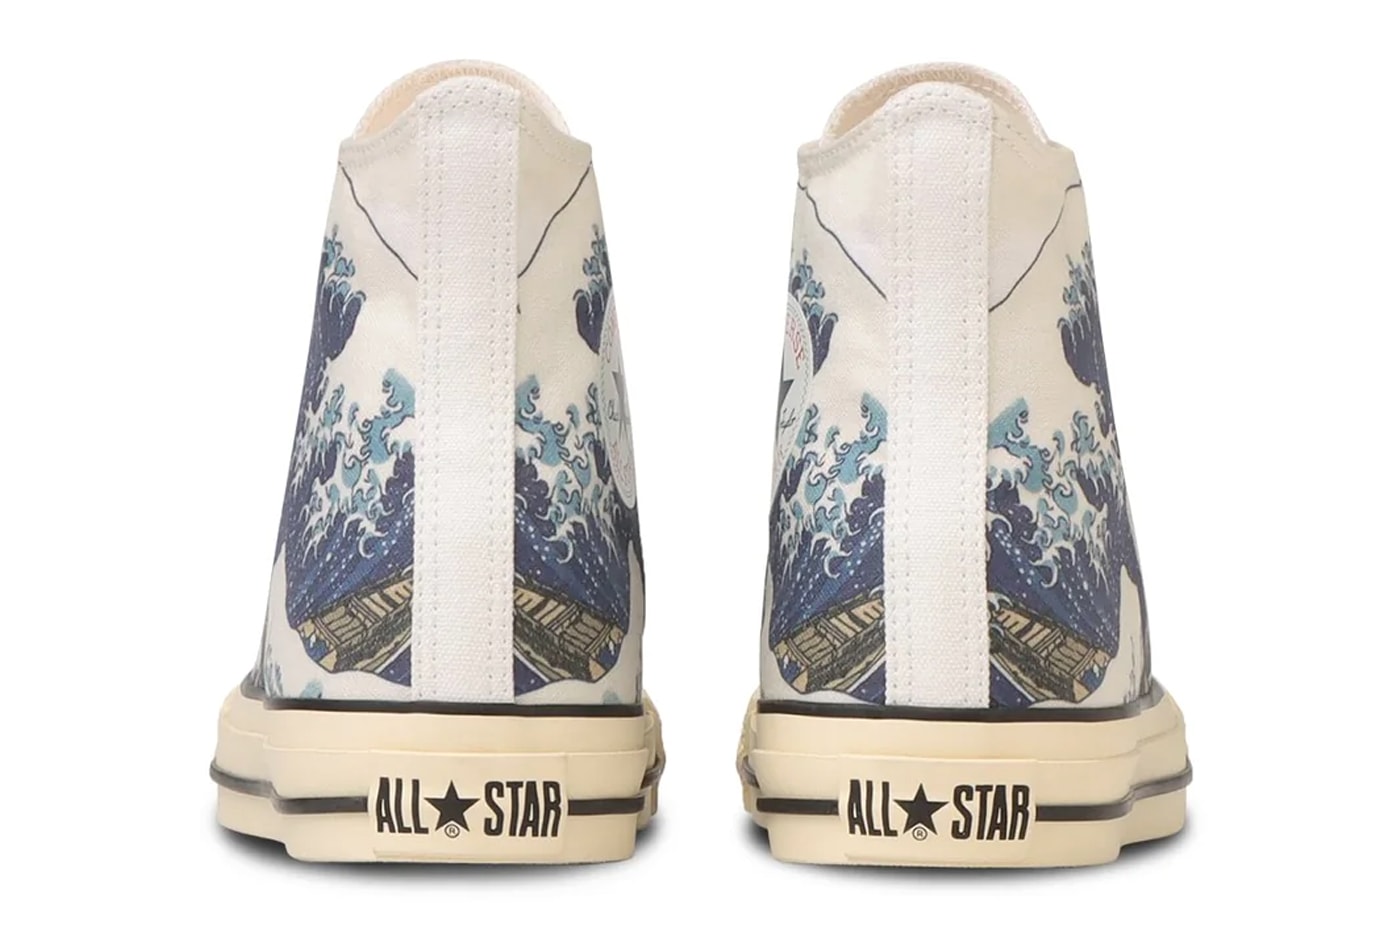 Converse All Star UKIYOEPRINT The Great Wave off Kanagawa Takiyasha the Witch and the Skeleton Spectre 31310151 31310150 Release Info